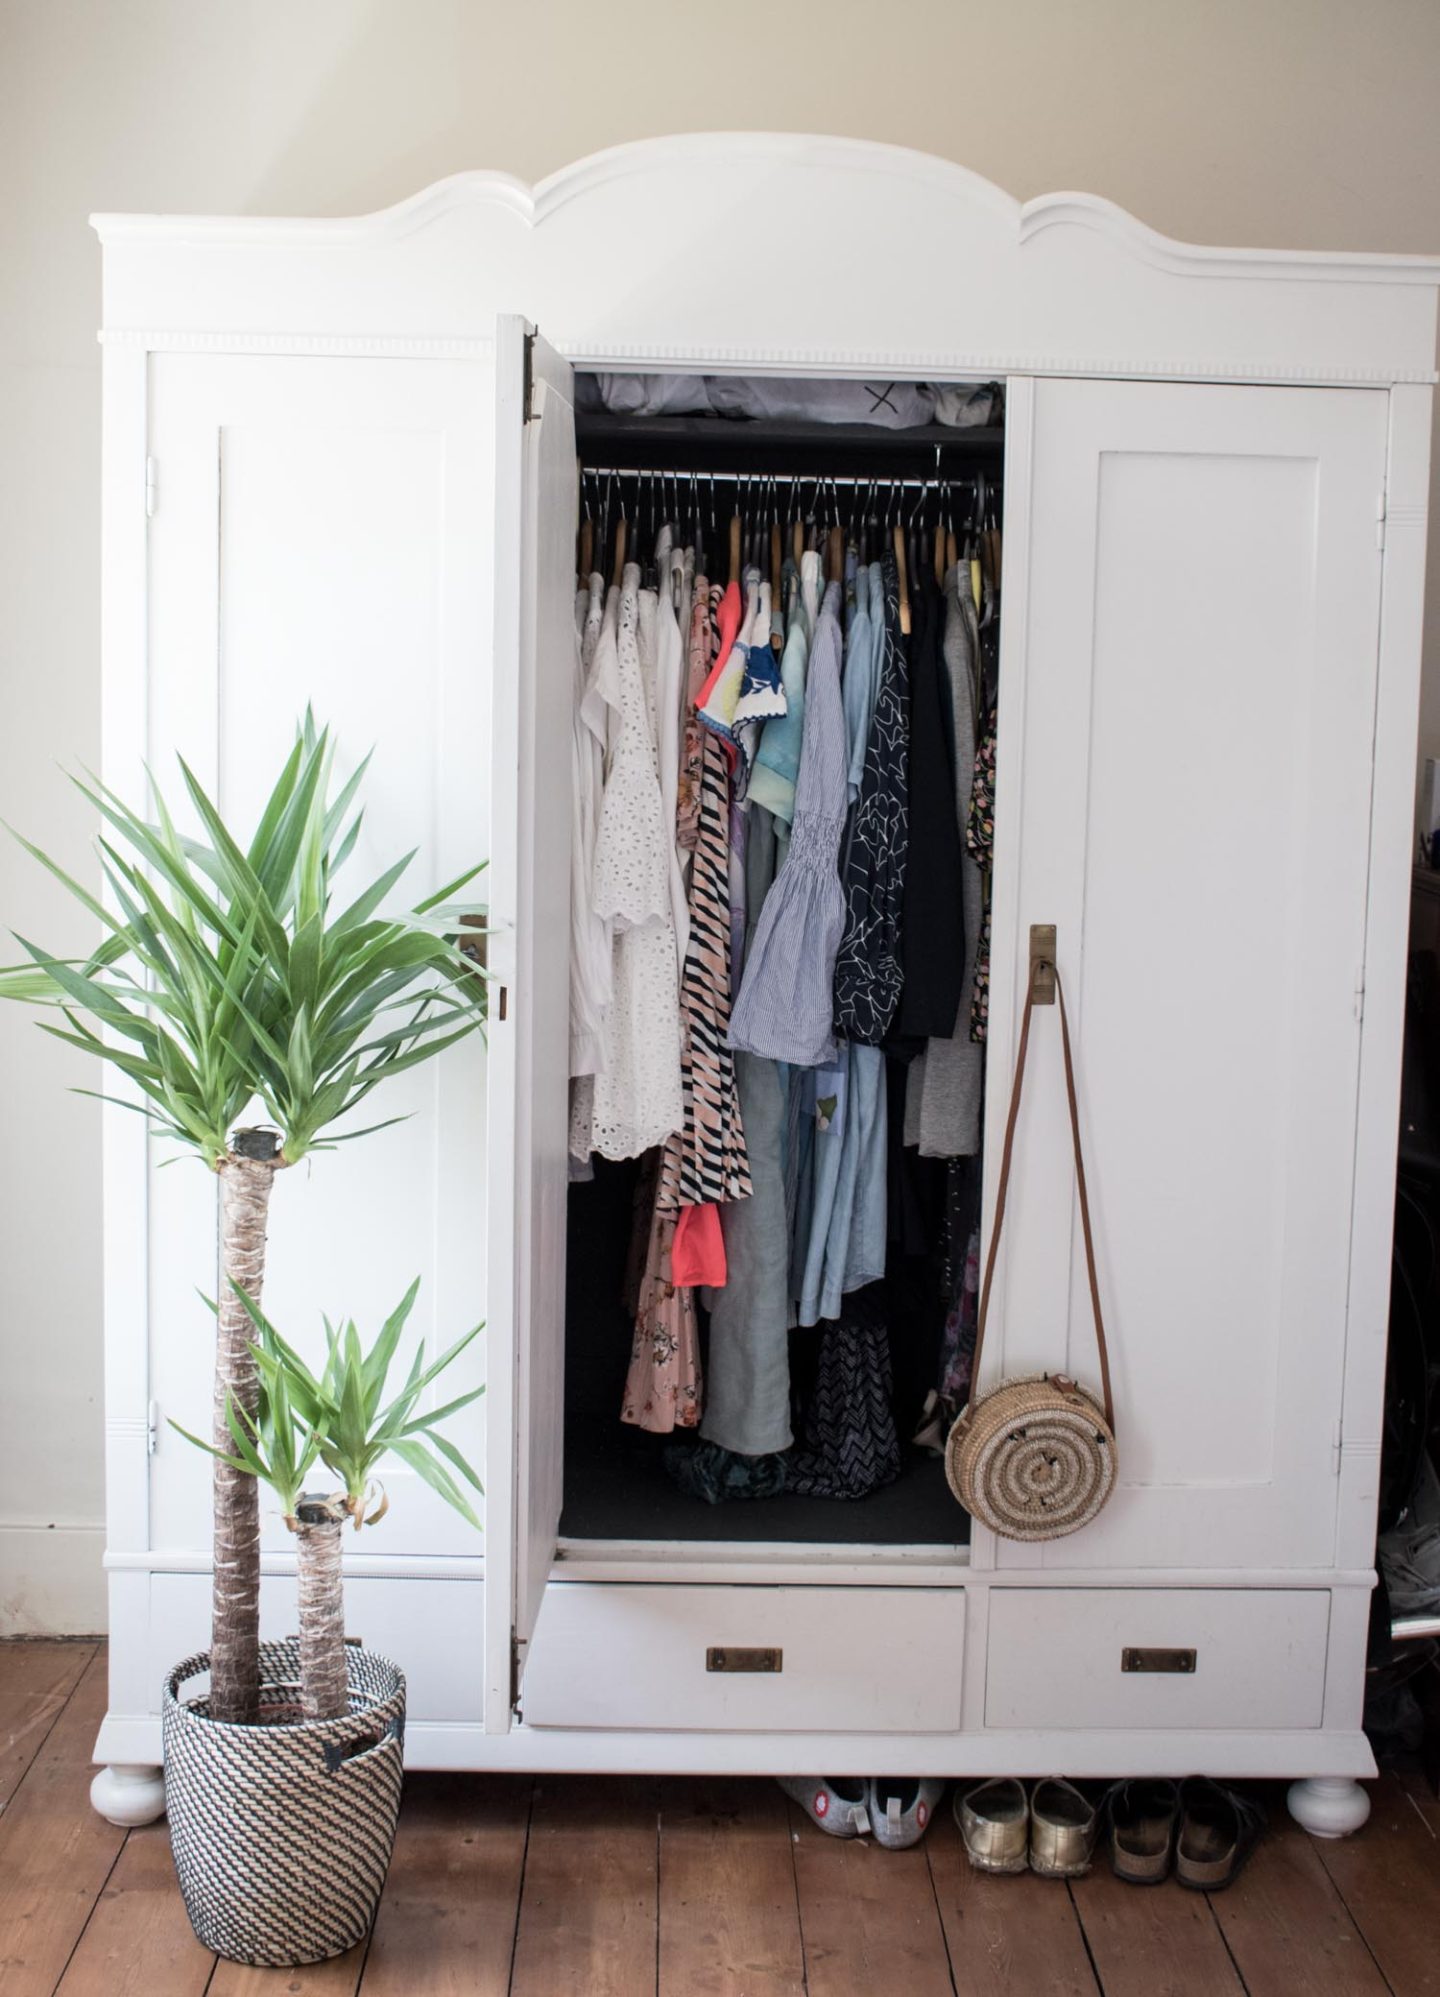 Ethical fashion blogger Karen Maurice's newly decluttered wardrobe